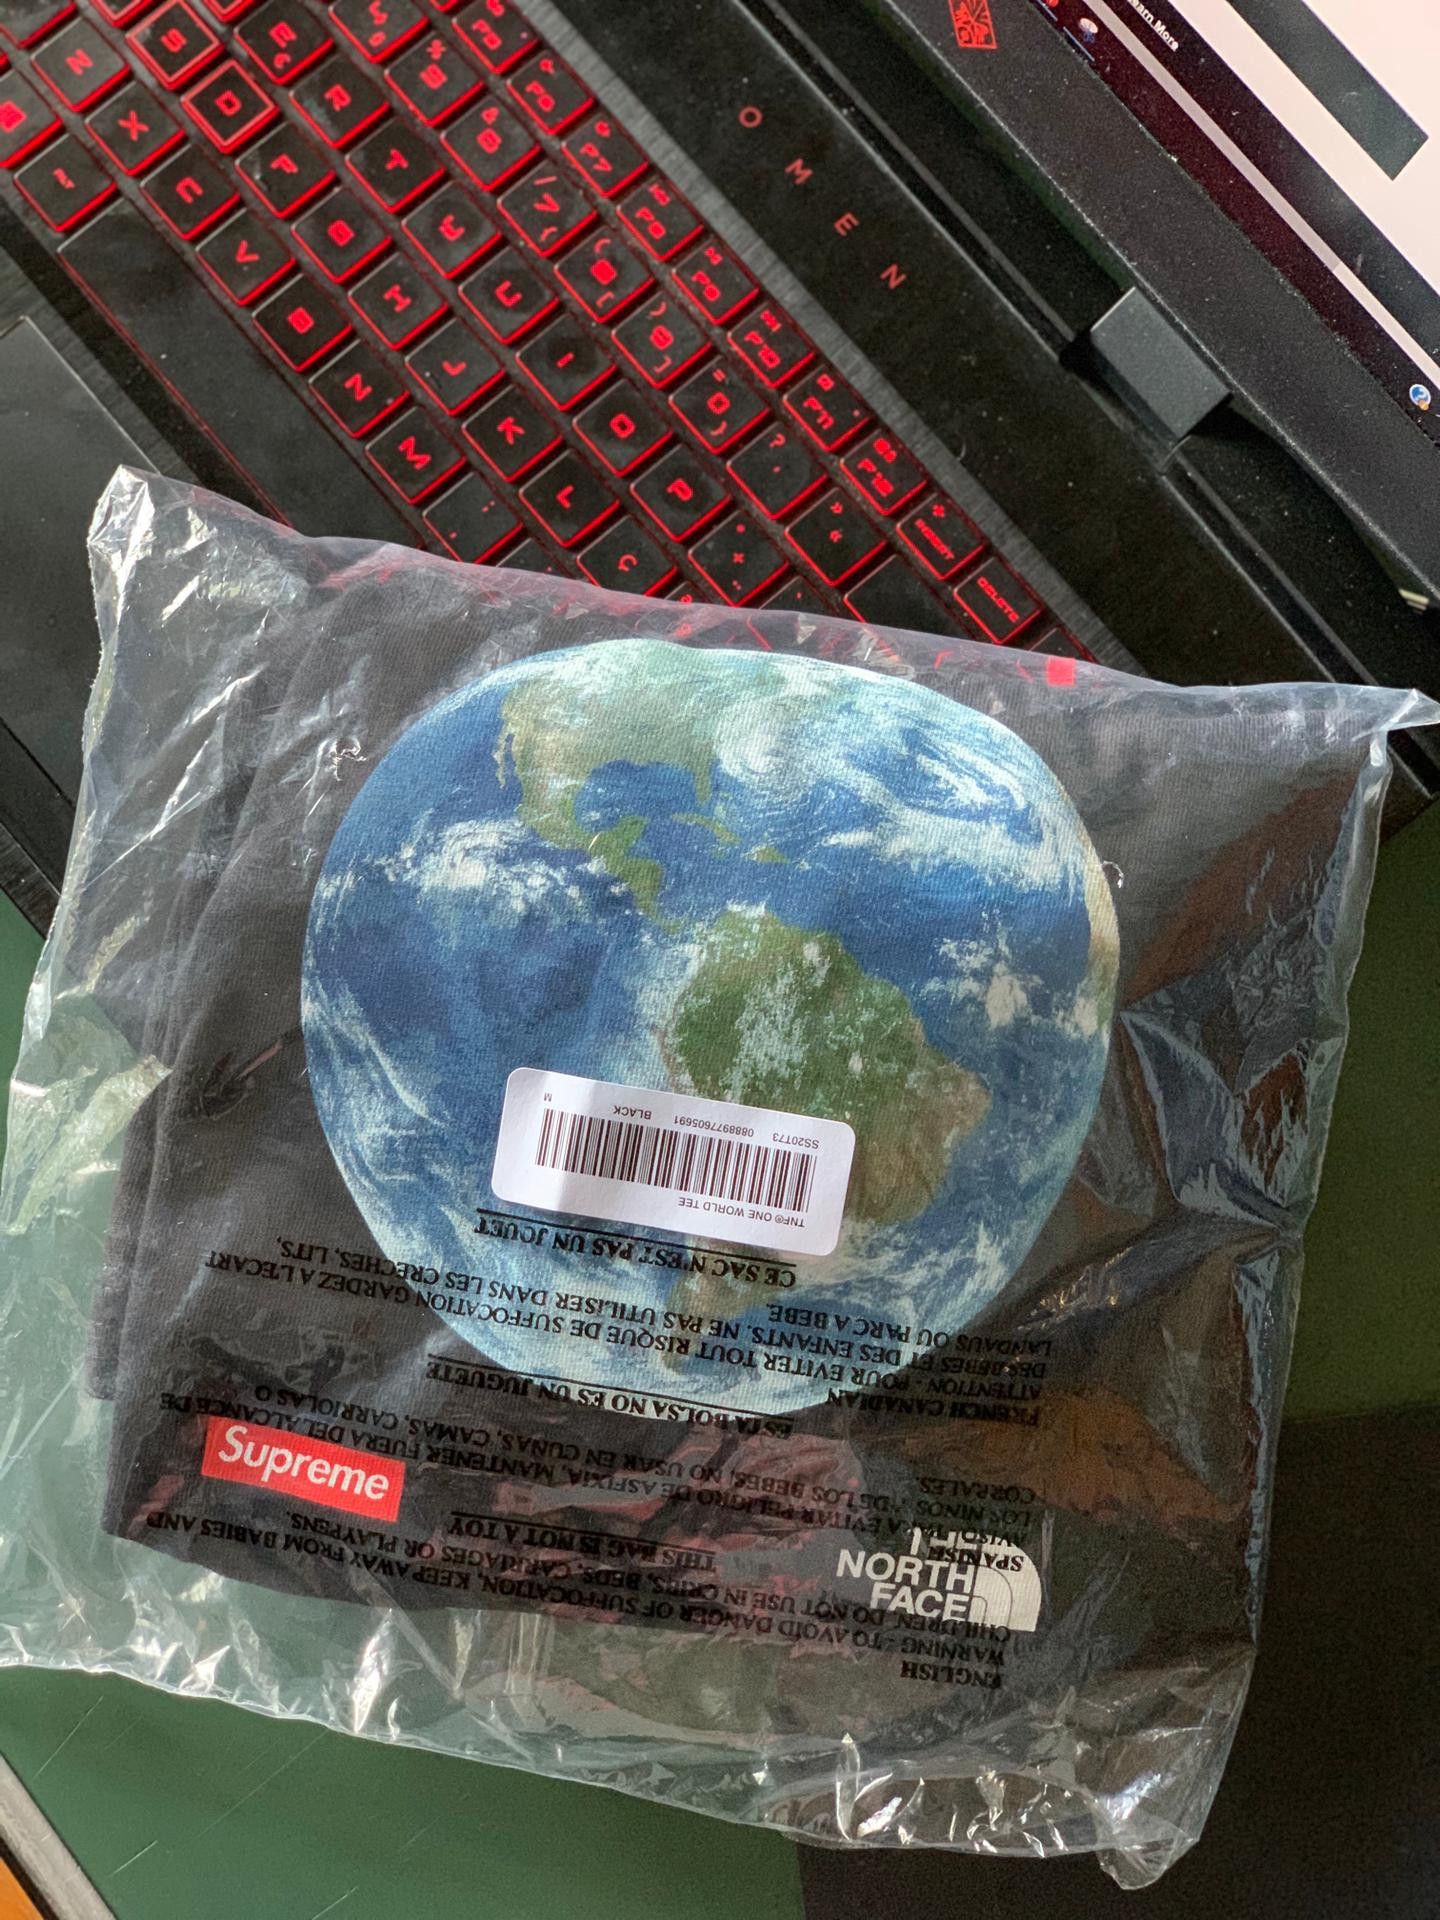 Supreme Supreme/ The North Face One World Tee | Grailed